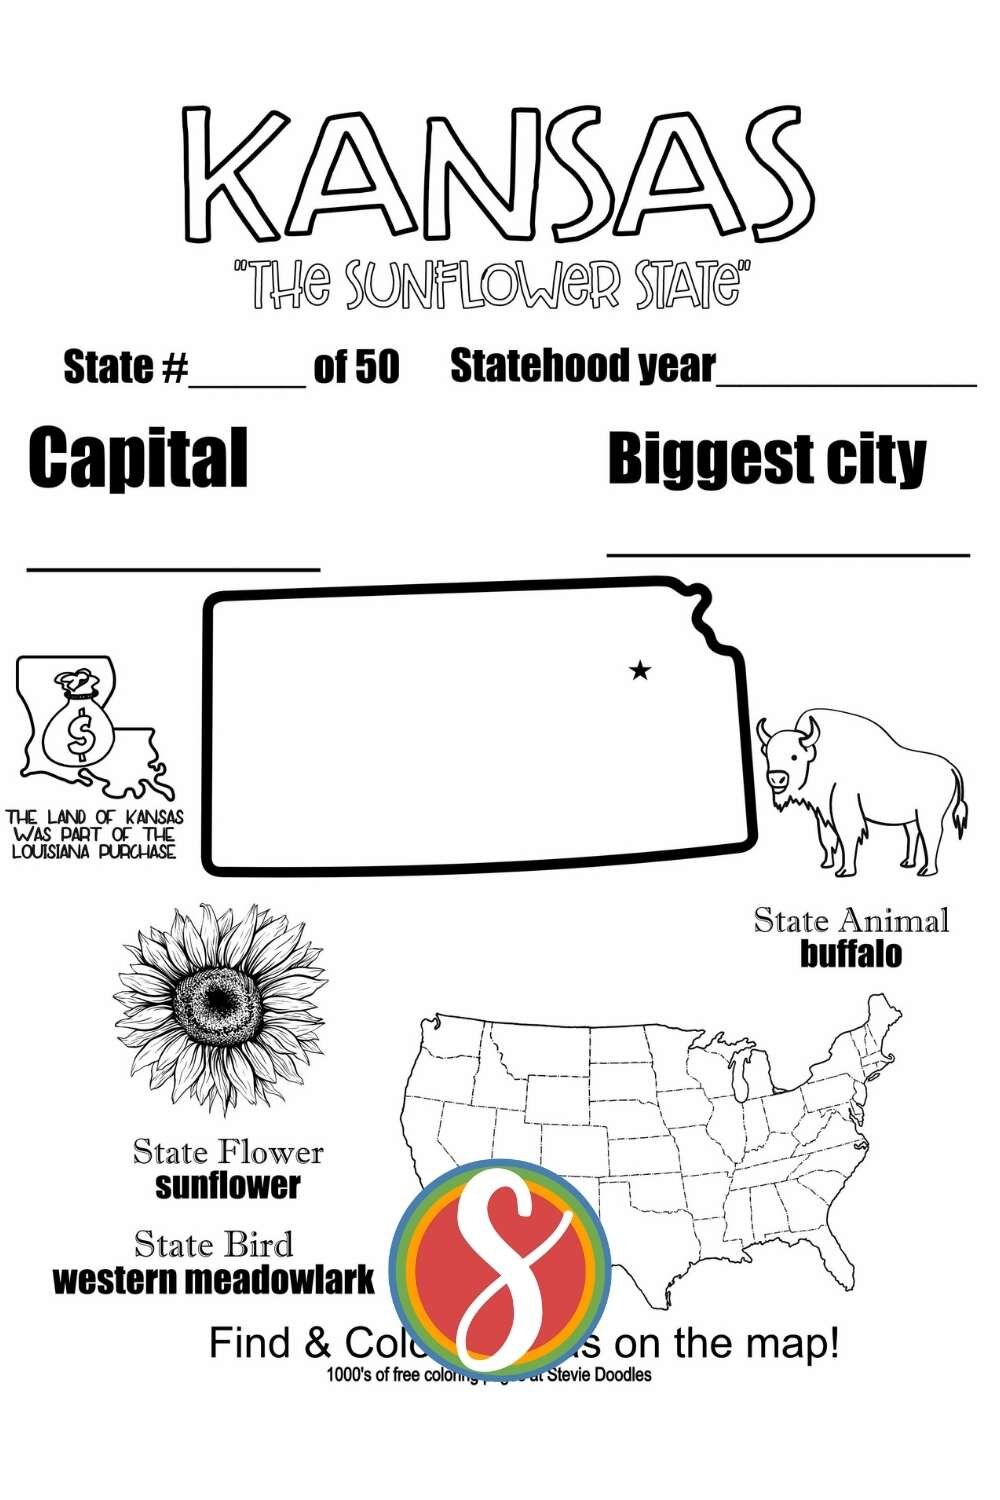 Kansas  facts - a free activity coloring page about Kansas from Stevie Doodles, free to print and color. Find 1000’s of free printable coloring sheets of all kinds at Stevie Doodles